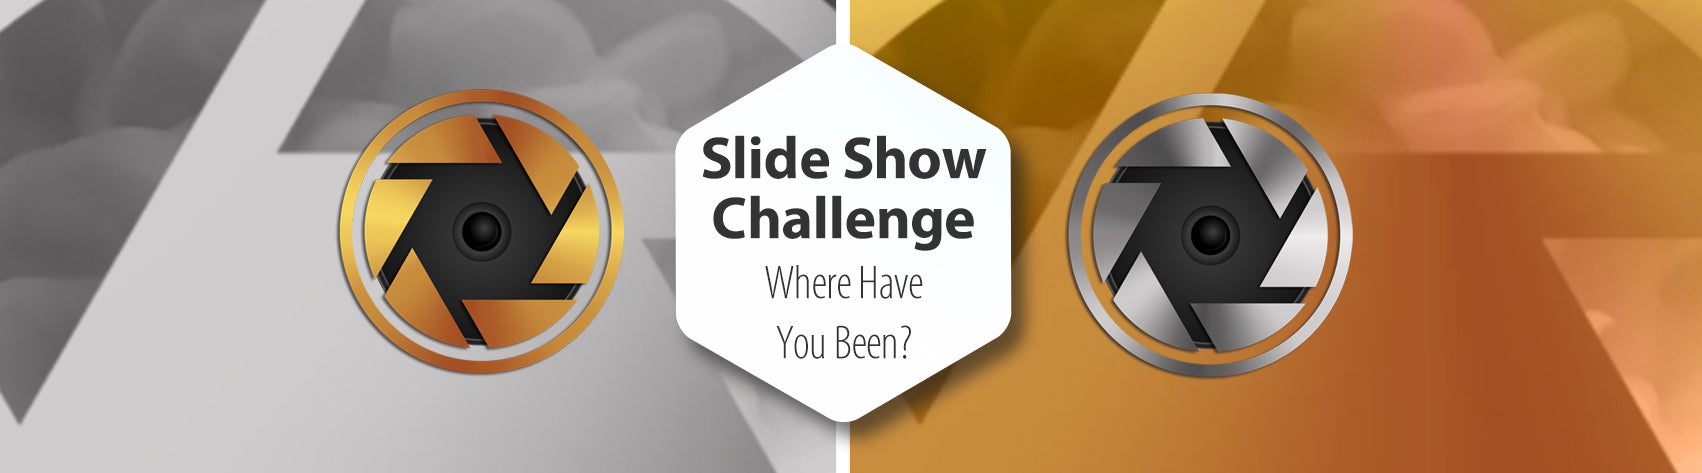 Slide Show Challenge - Where Have You Been?